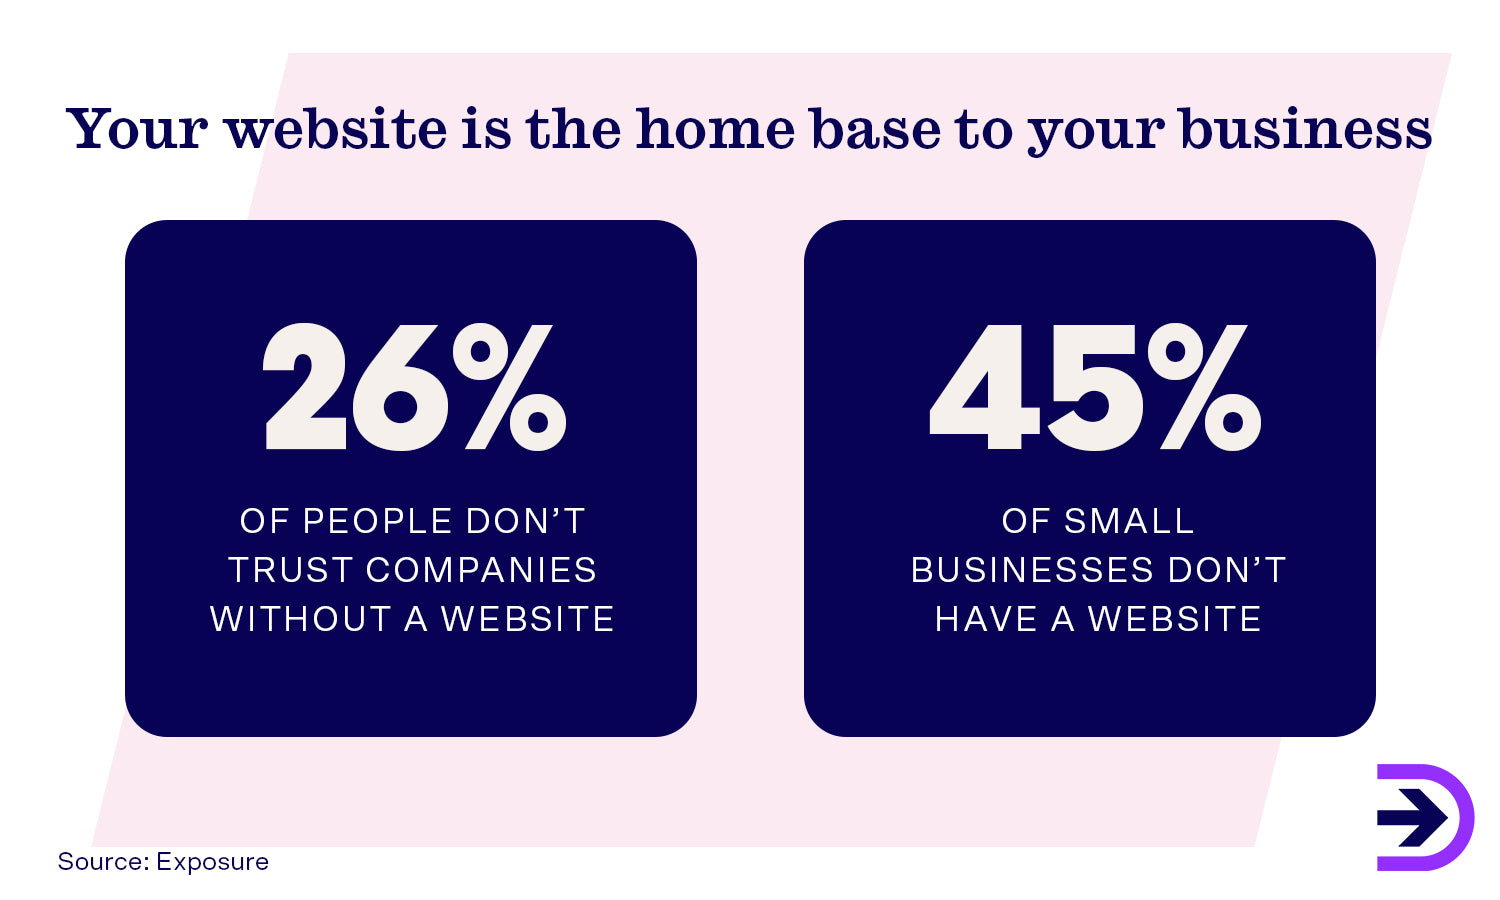 Just having a website gives customers more trust in the authenticity of your small business.